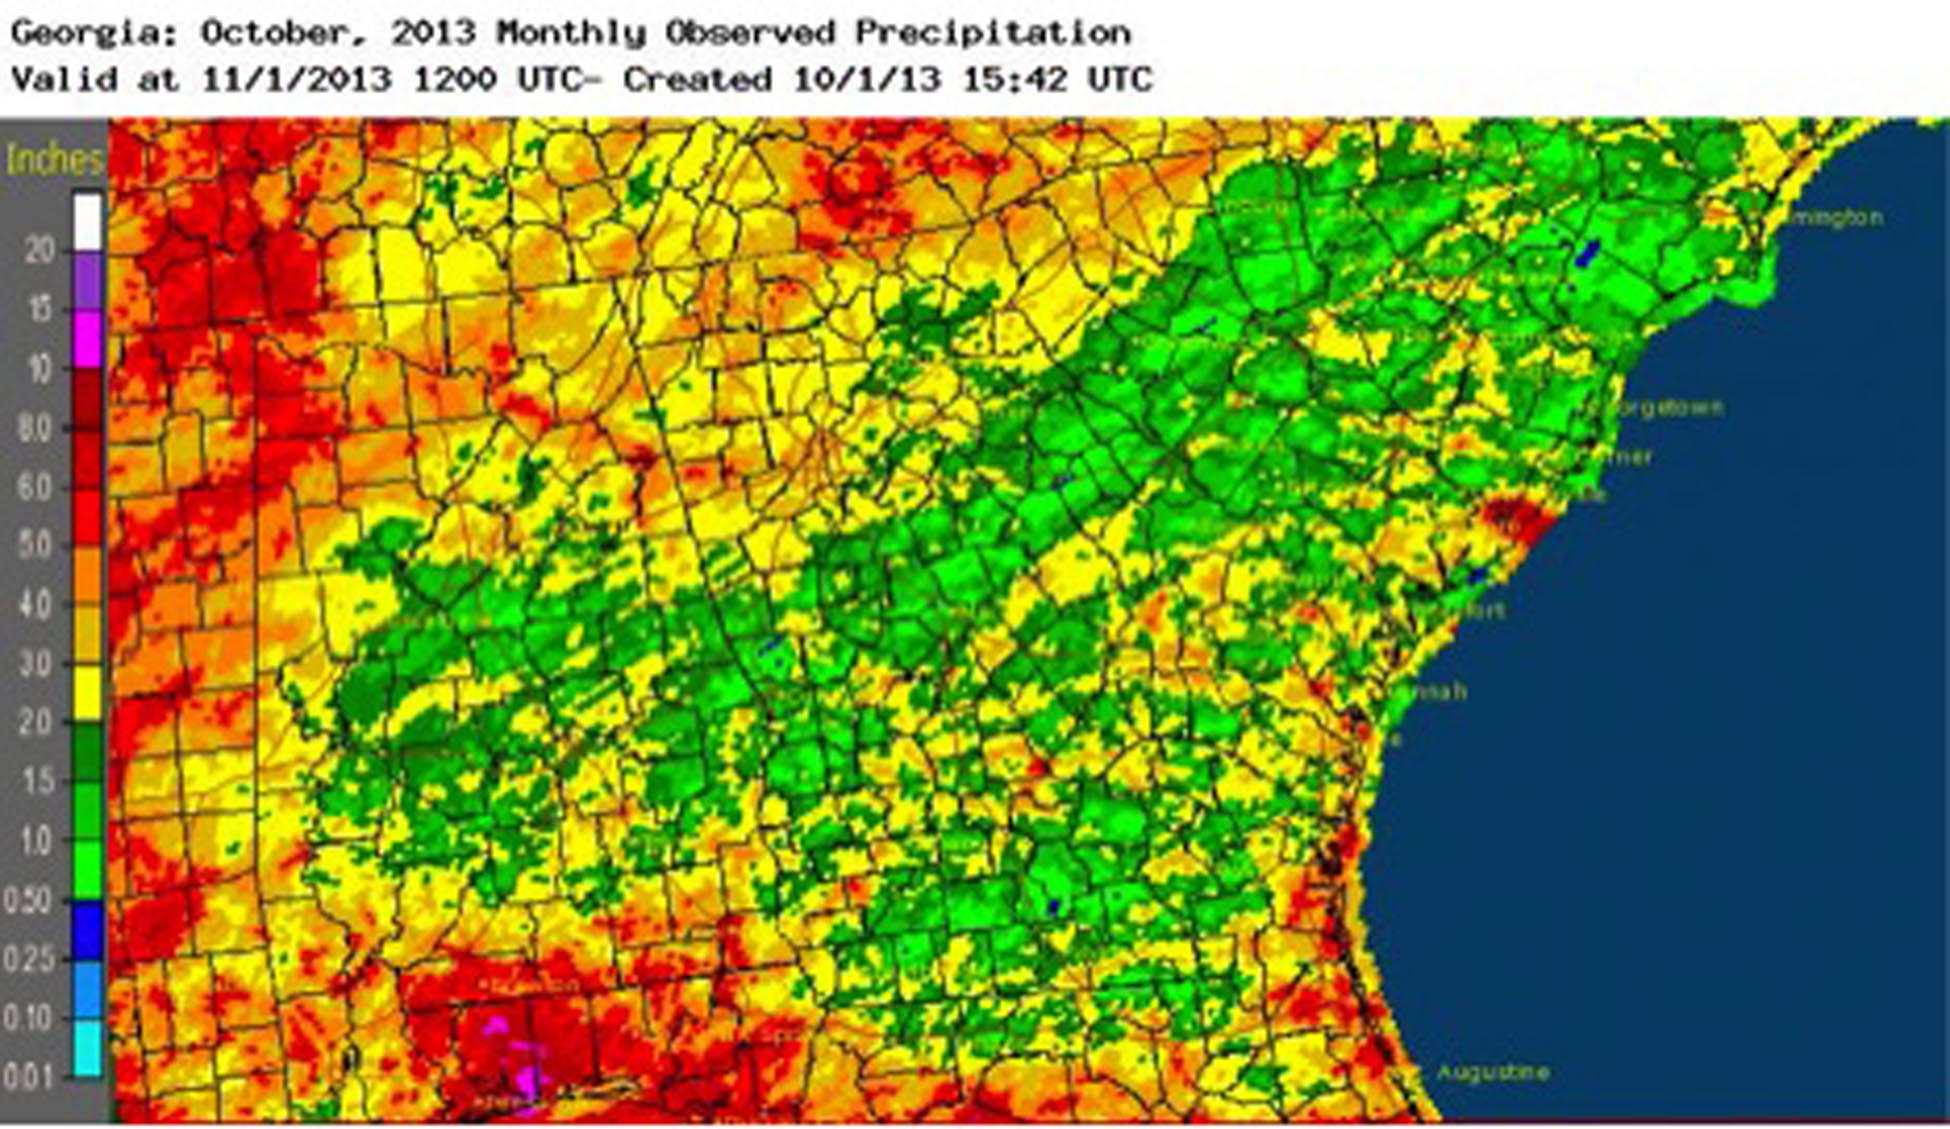 After a much wetter than average summer, September 2013 gave Georgians a chance to dry out.